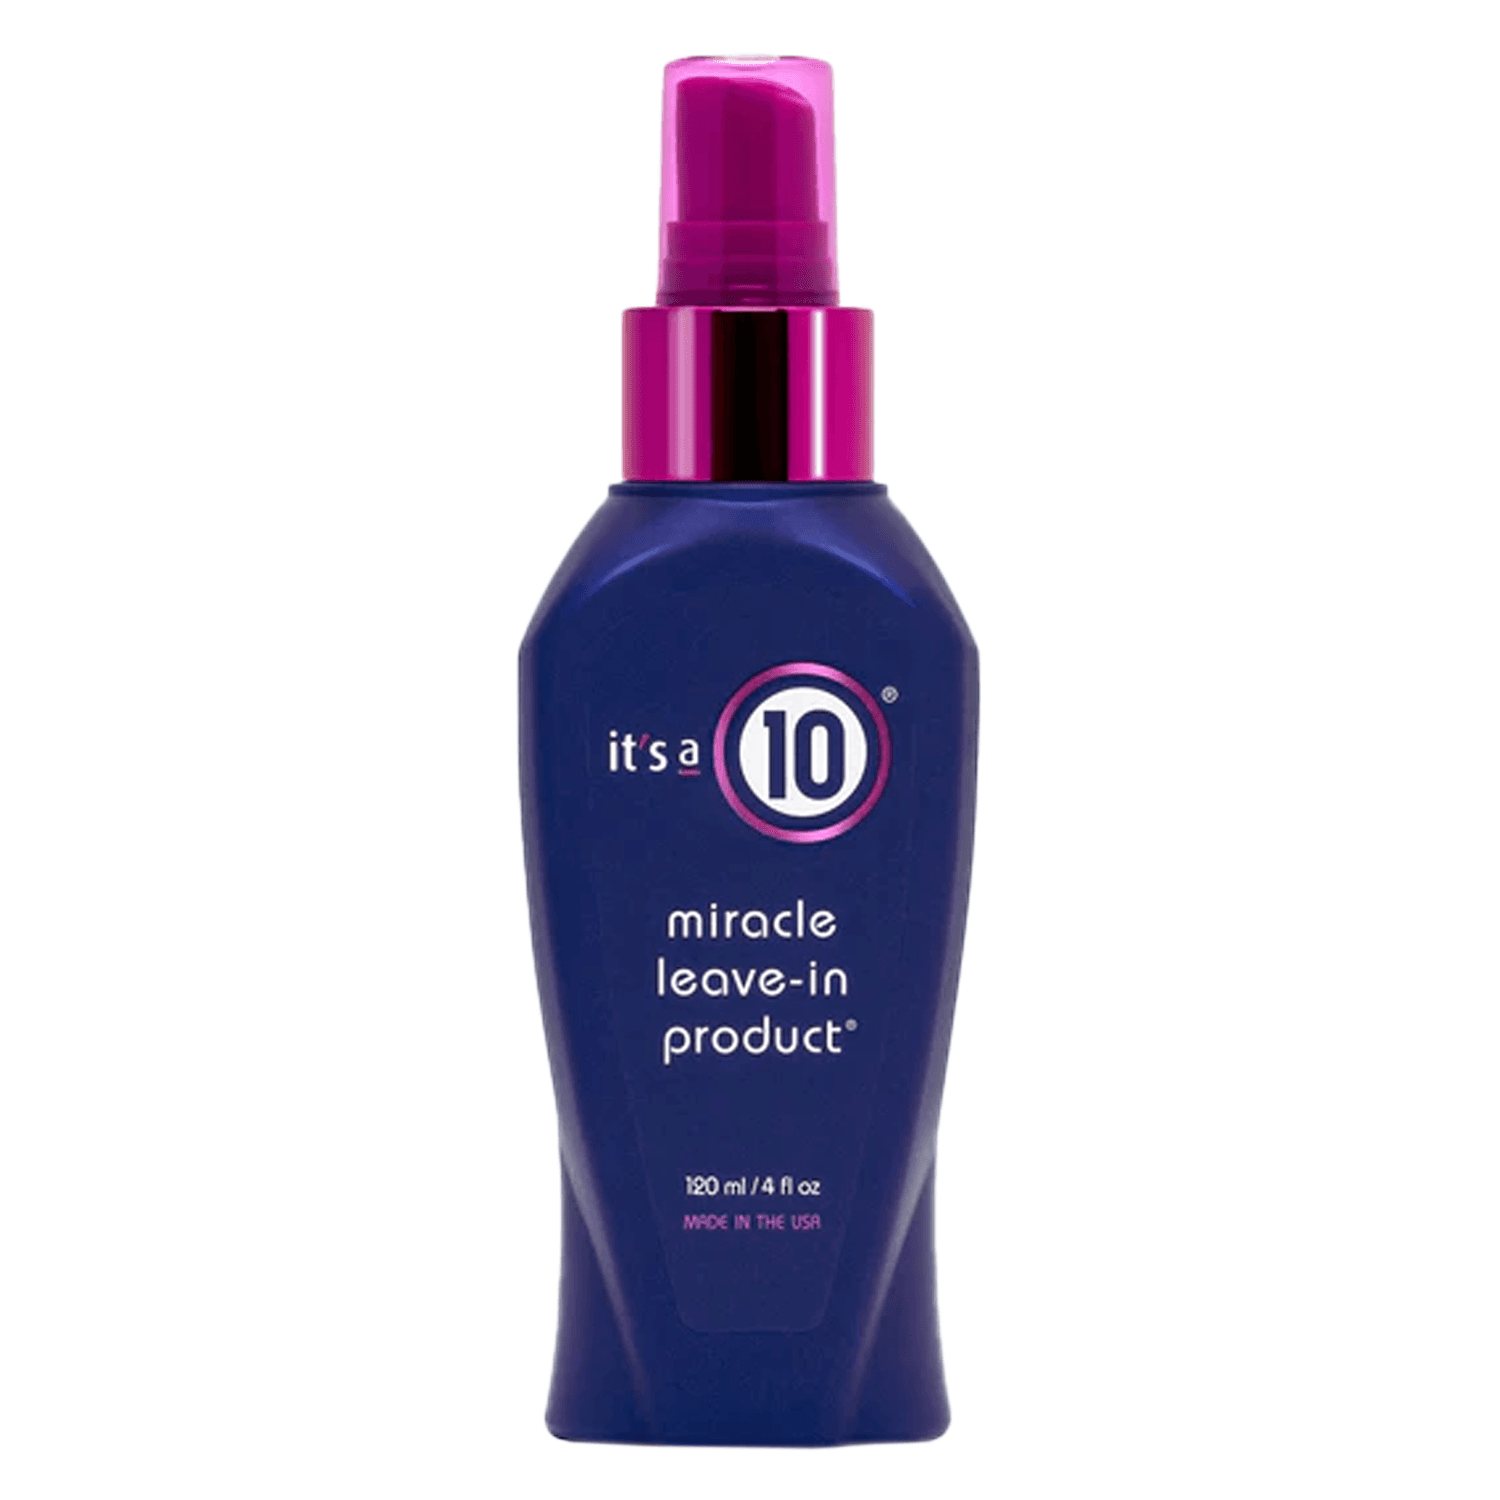 it's a 10 haircare - Miracle Leave-In